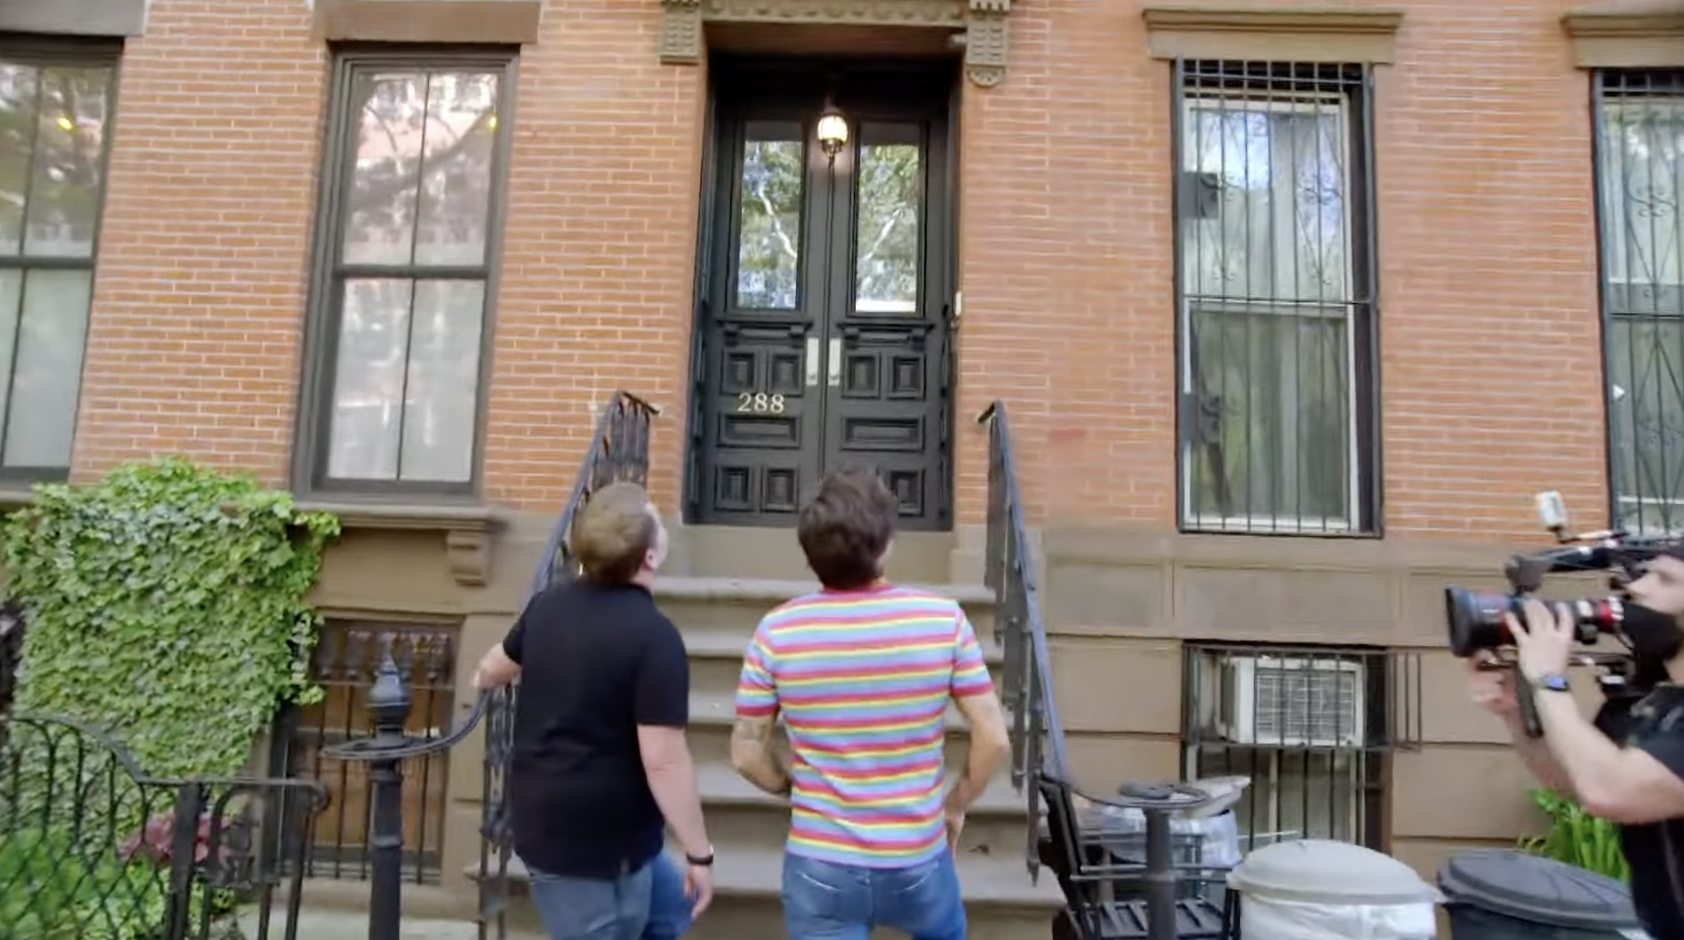 Corden and Styles face a brownstone stoop, looking up at a second-level window